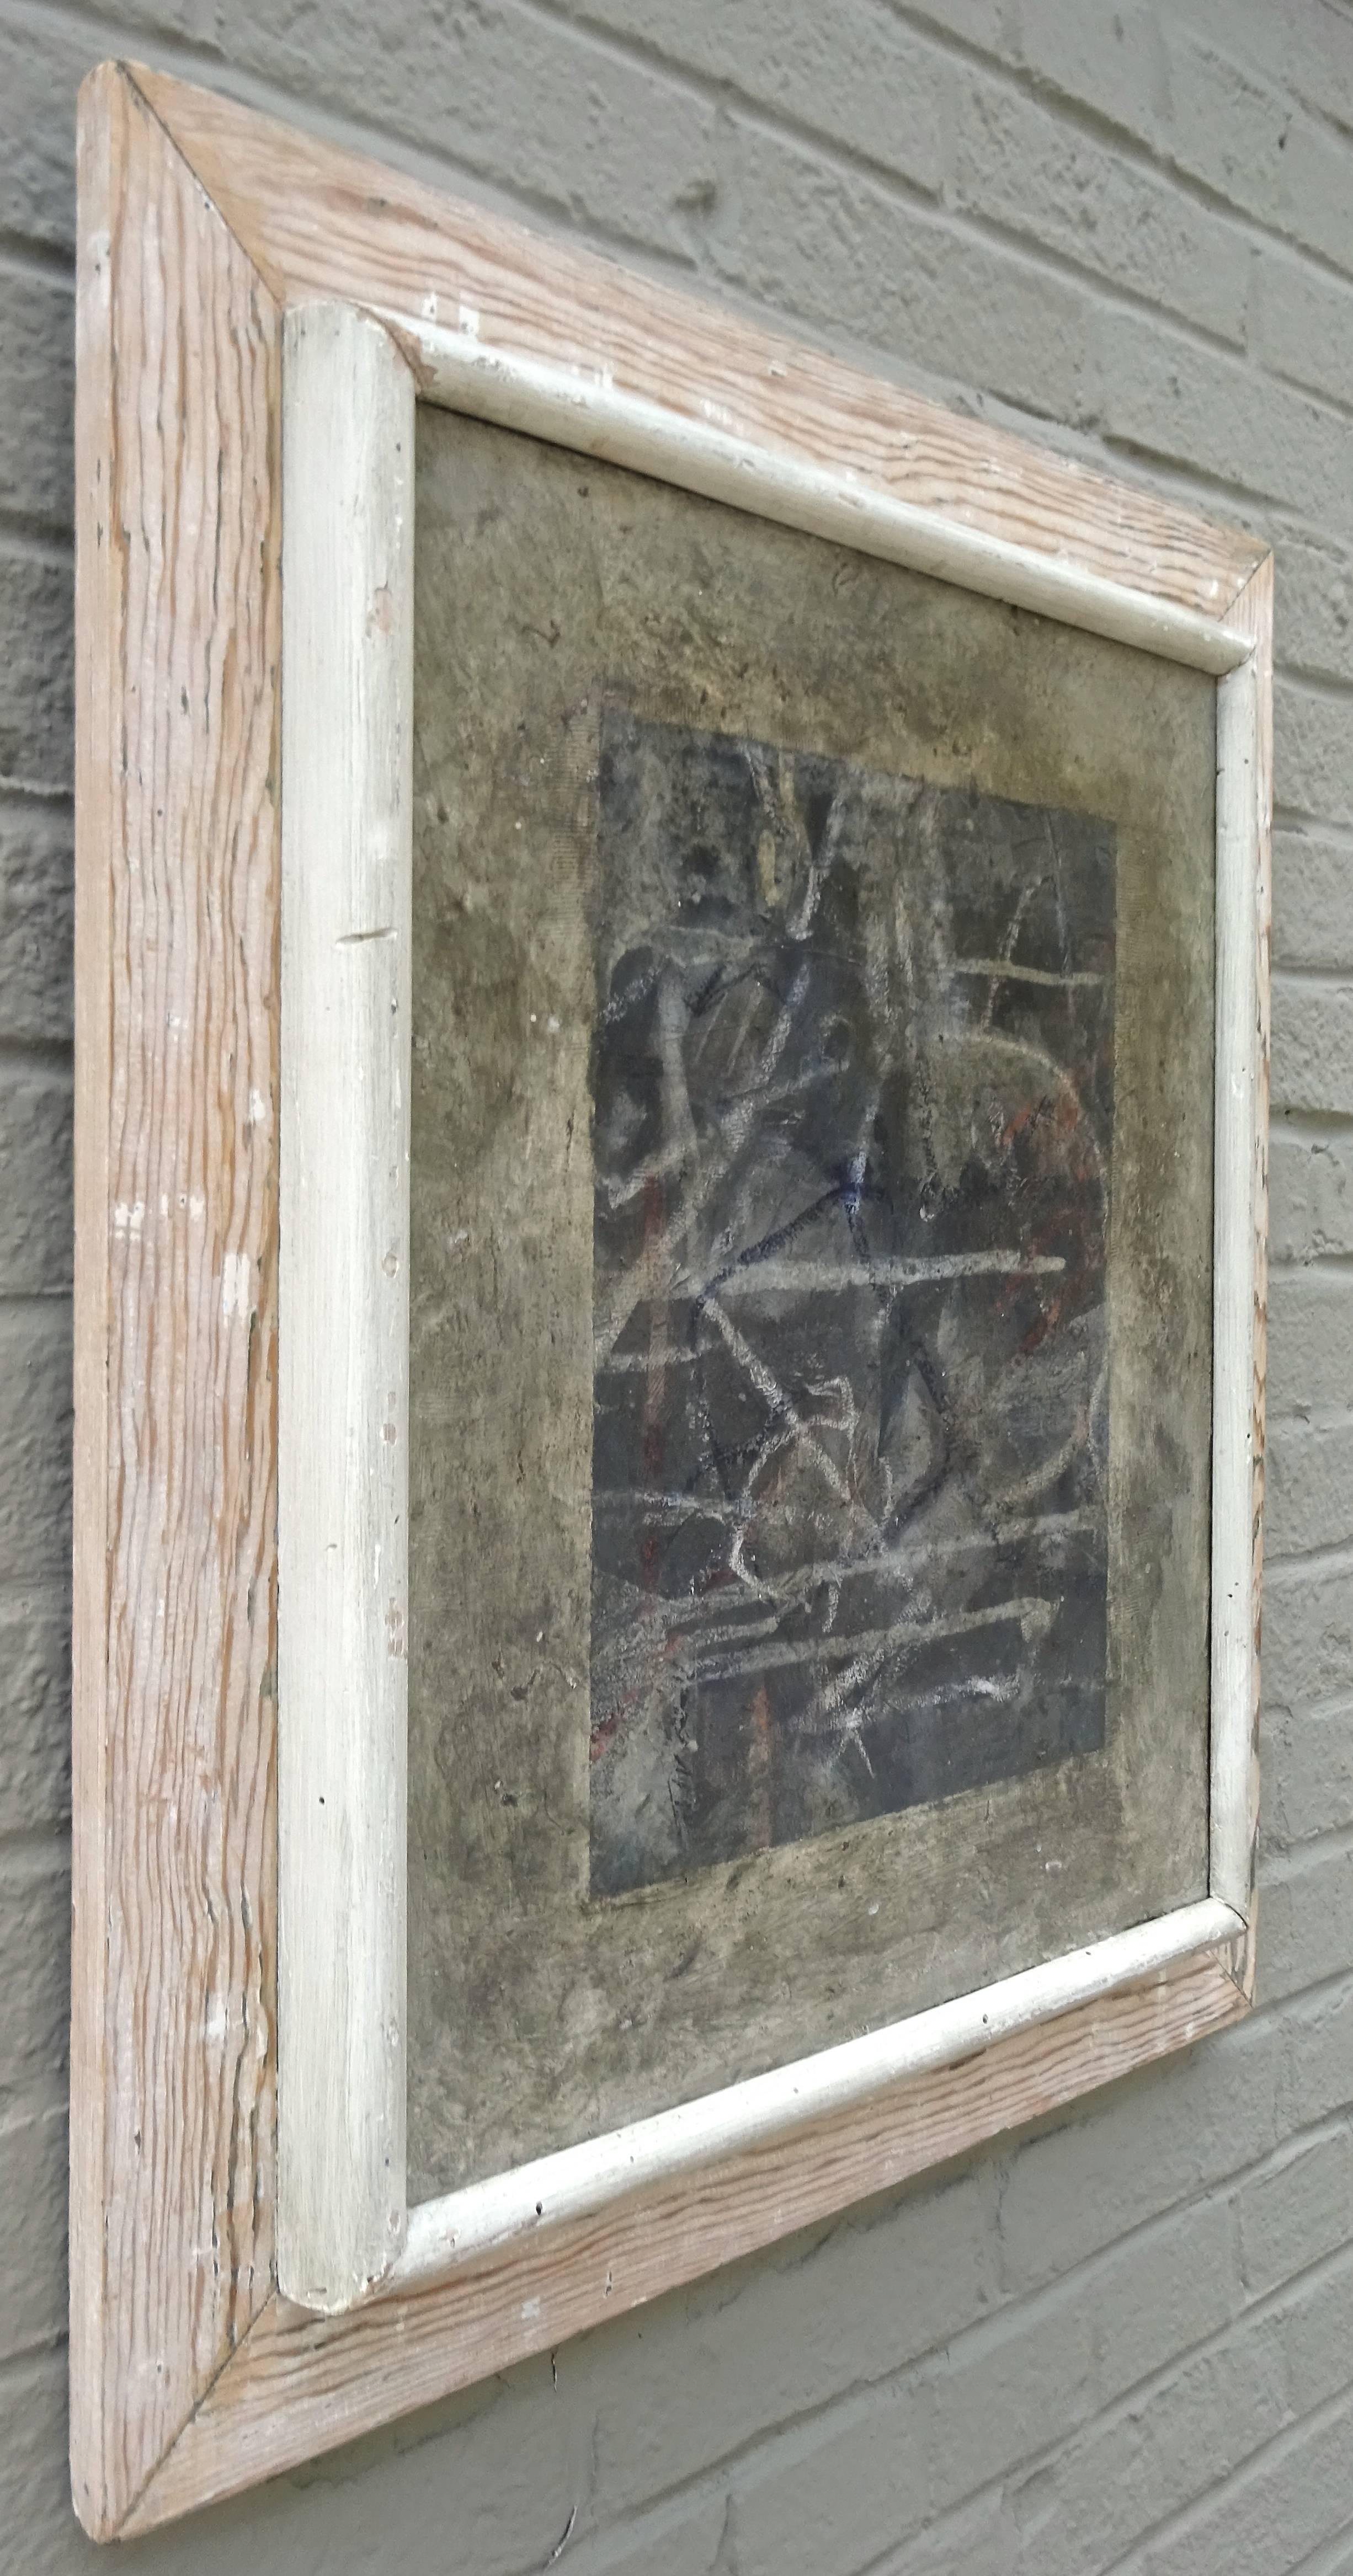 Charming 1940s abstract oil painting in original distressed frame.